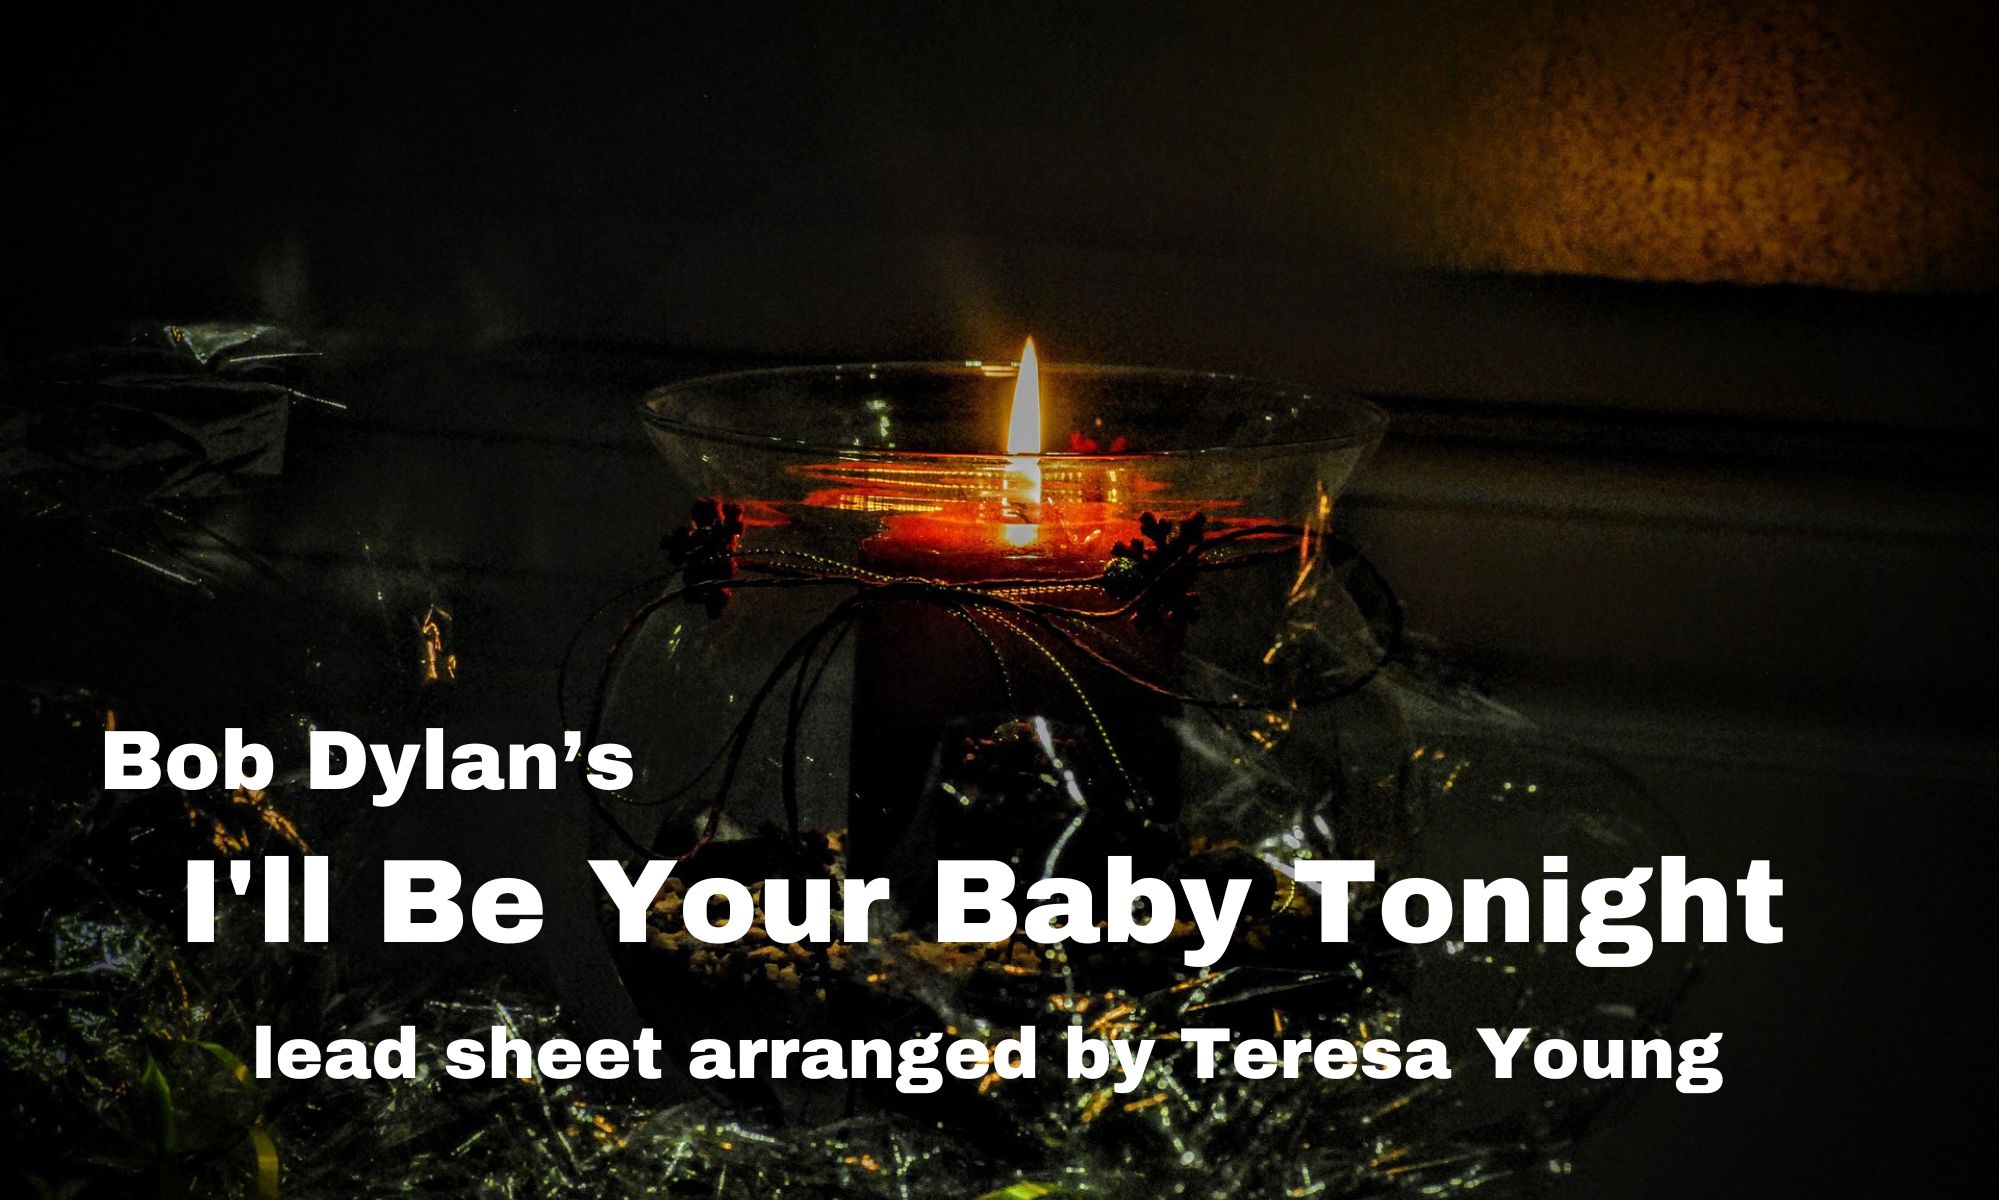 I'll Be Your Baby Tonight lead sheet arr. Teresa Young